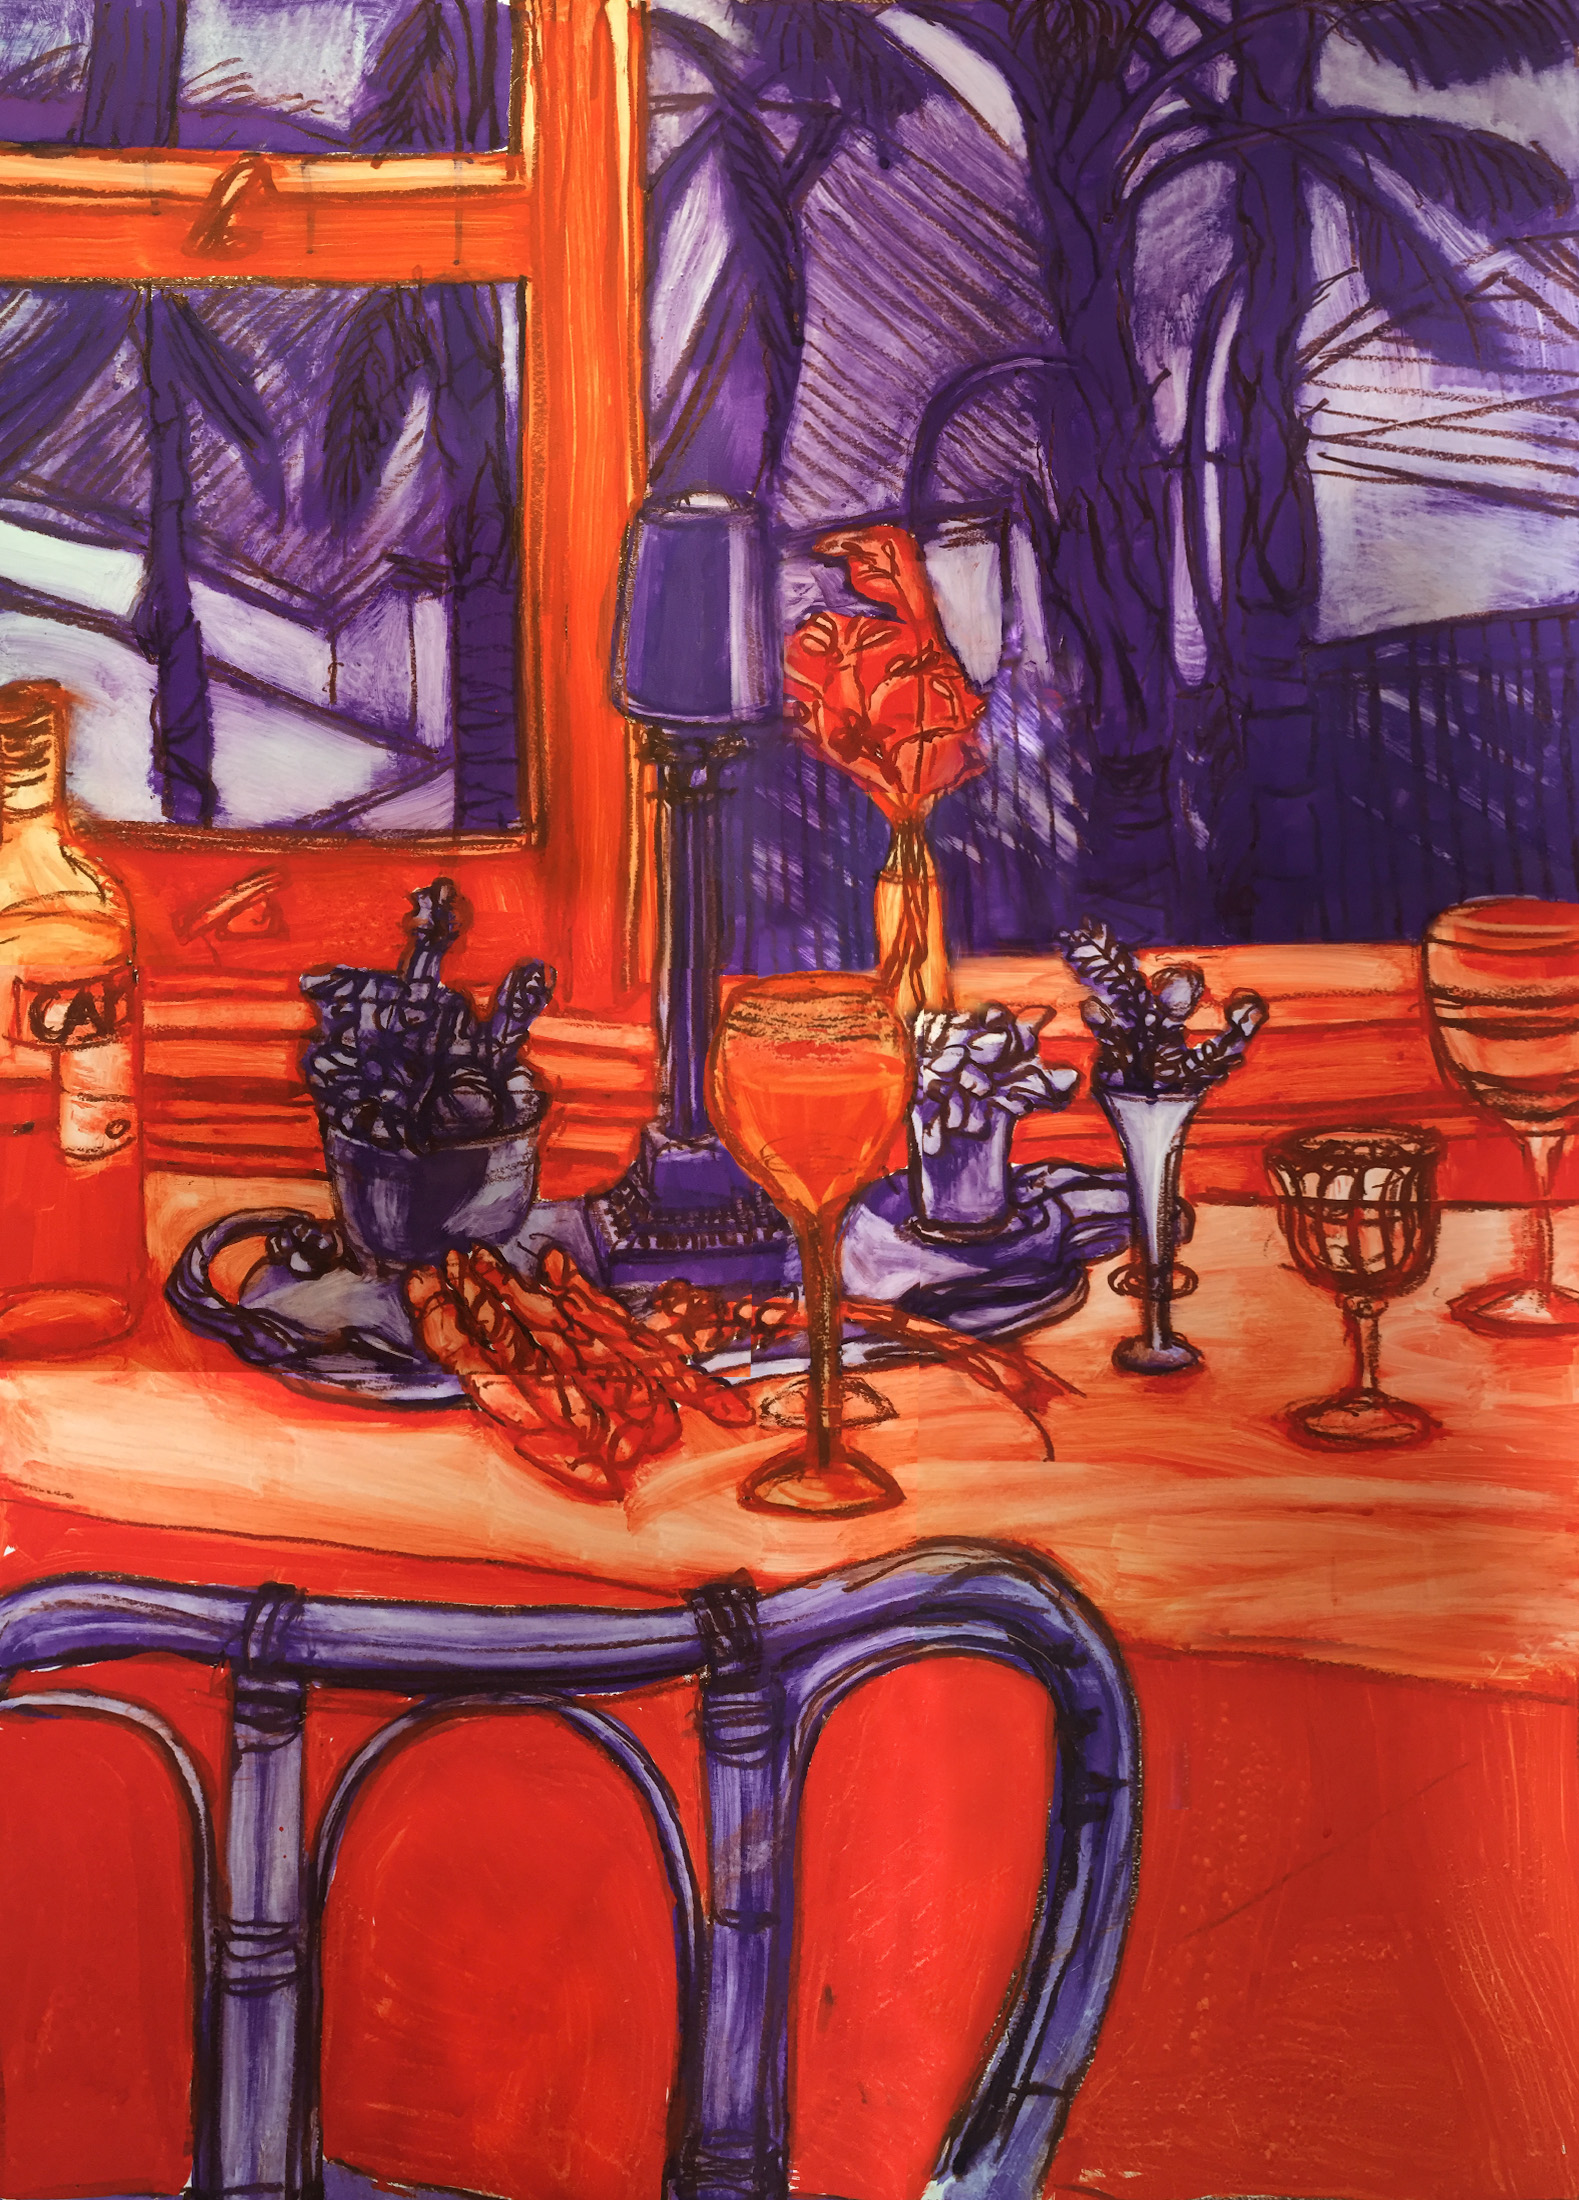 A painting by Sharon Officer, still life of glasses and bottles on a table in red and purple hues